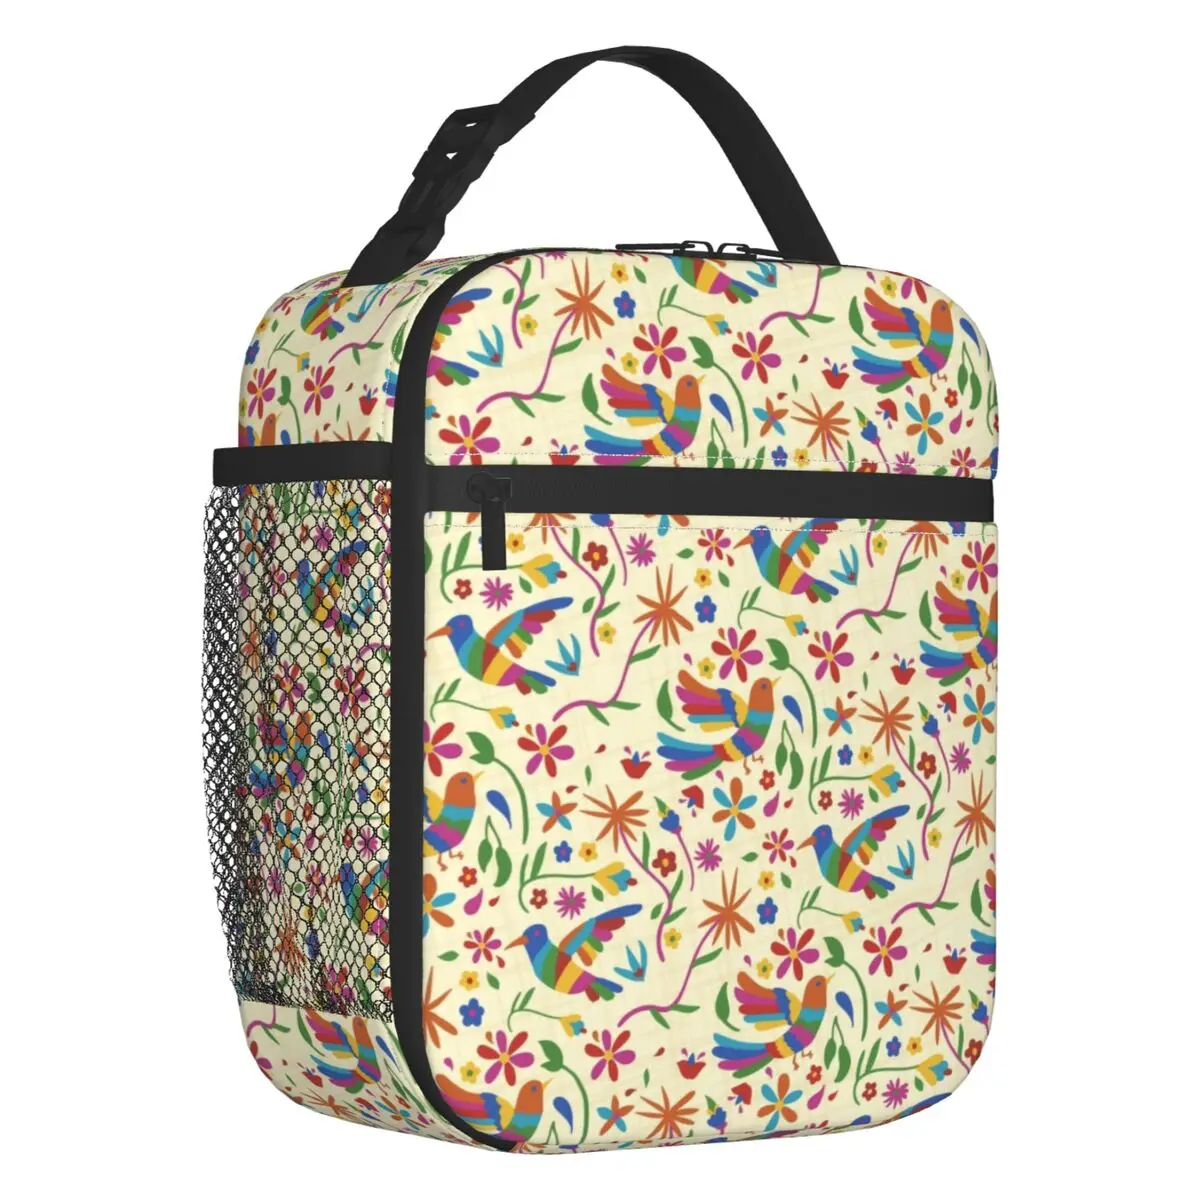 

Mexican Otomi Birds And Flowers Pattern Insulated Lunch Bag Picnic Traditional Textile Art Waterproof Cooler Thermal Lunch Box